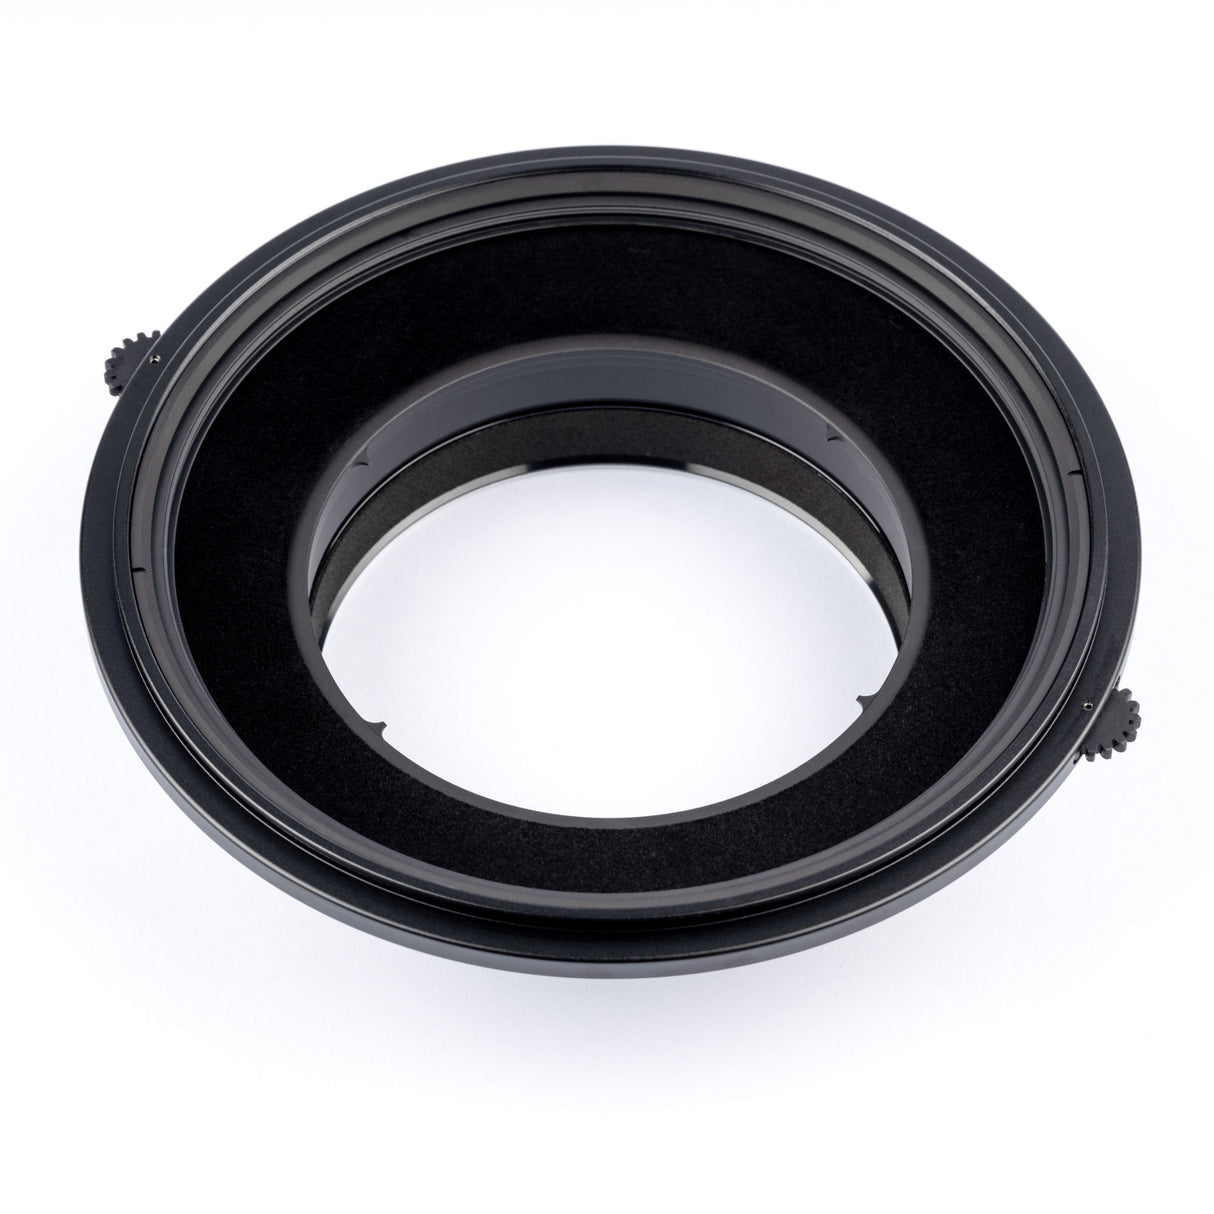 NiSi S6 150mm Filter Holder Adapter Ring for Sigma 14mm f/1.4 DG DN Art